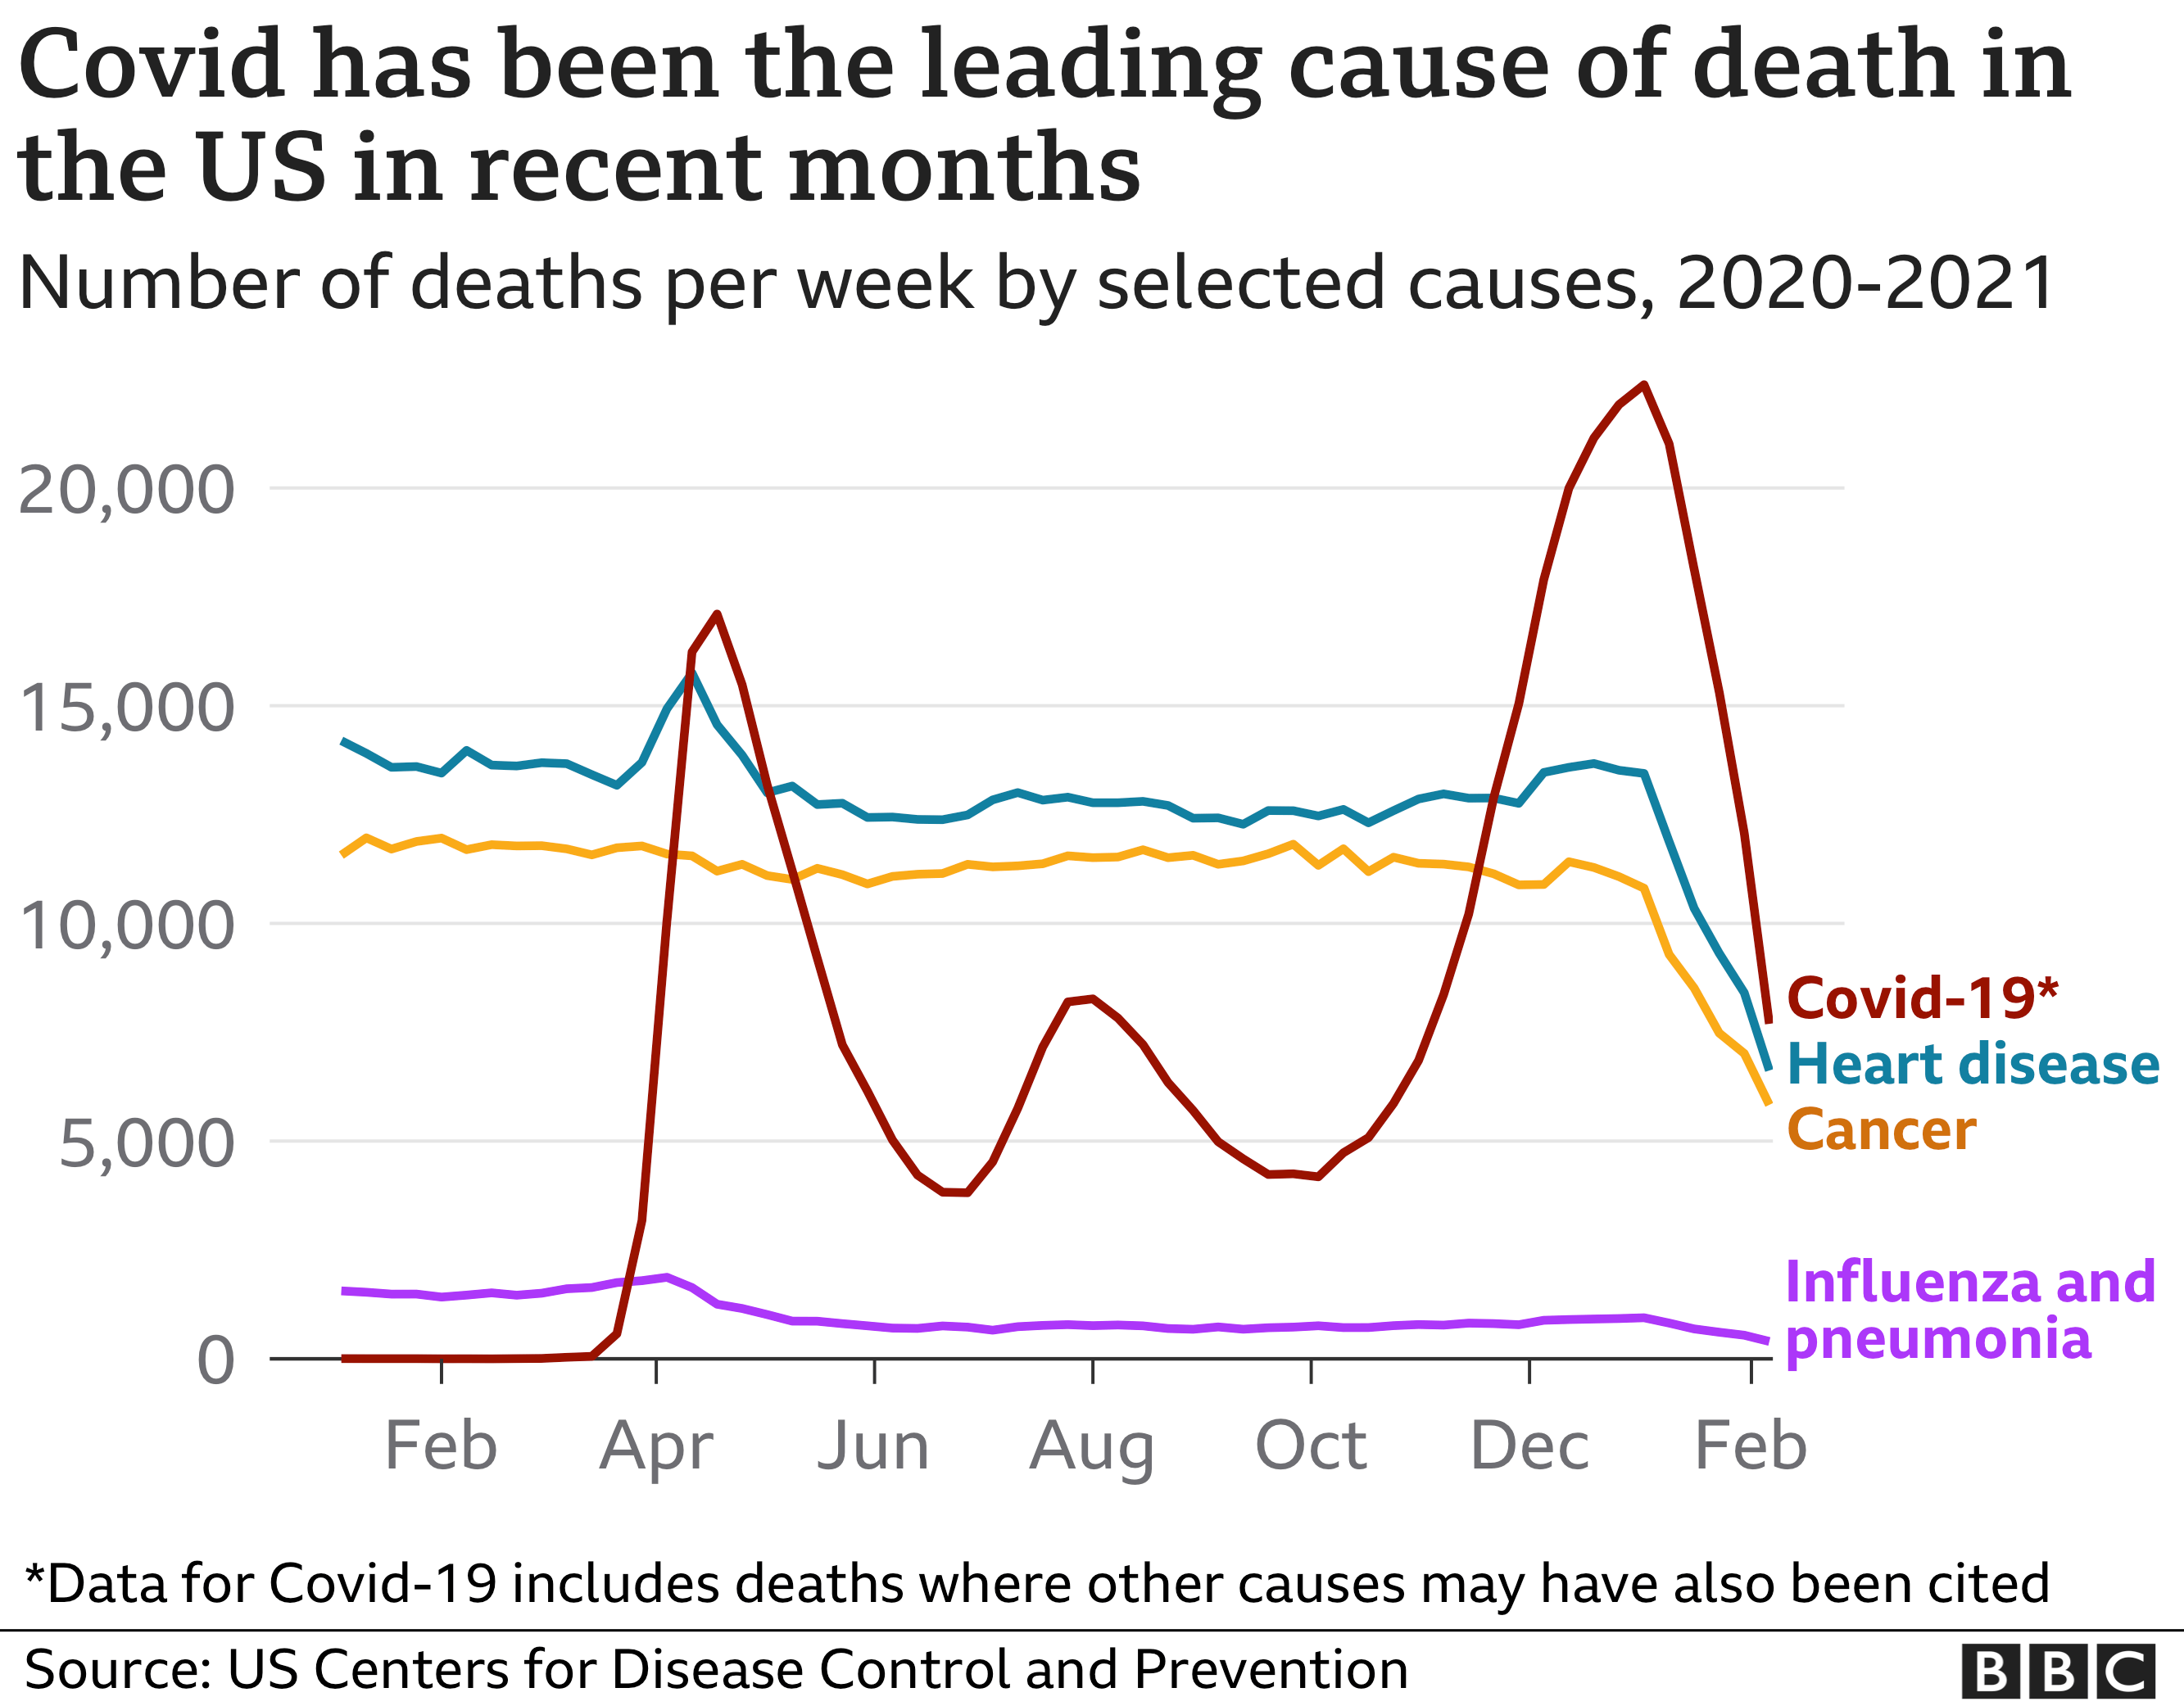 Leading causes of death in the US